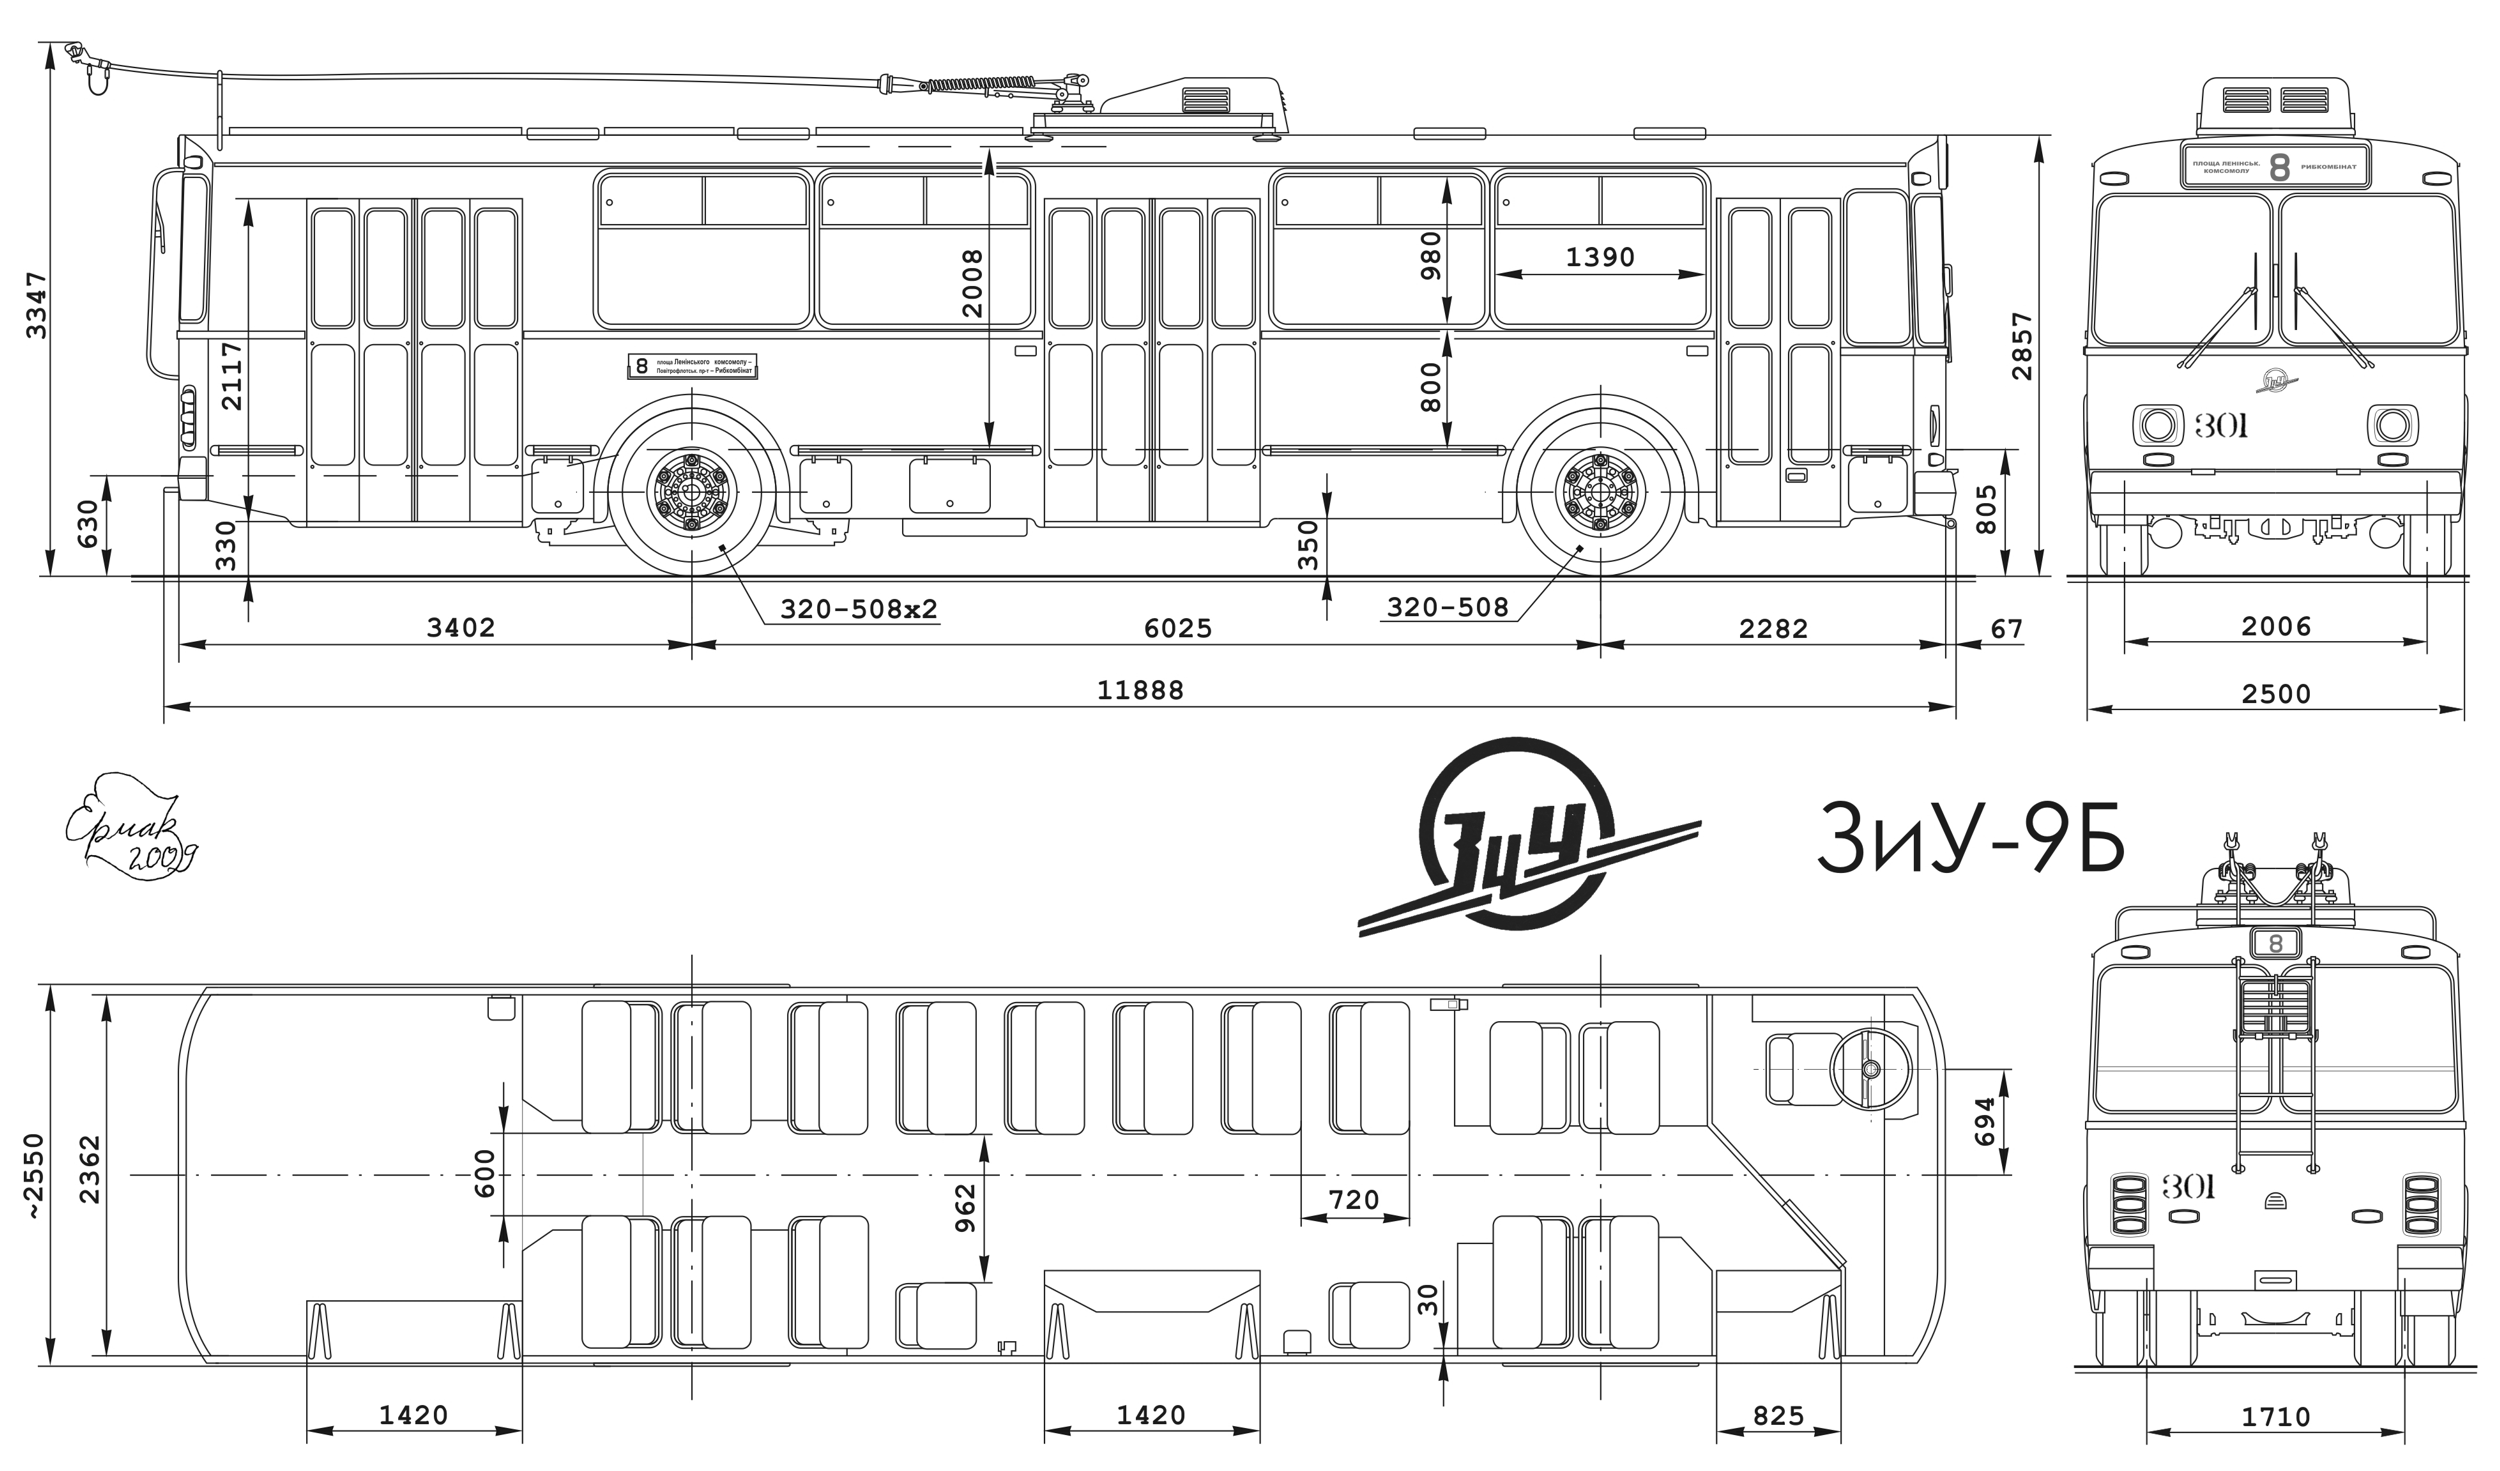 Rolling Stock Drawings and Blueprints